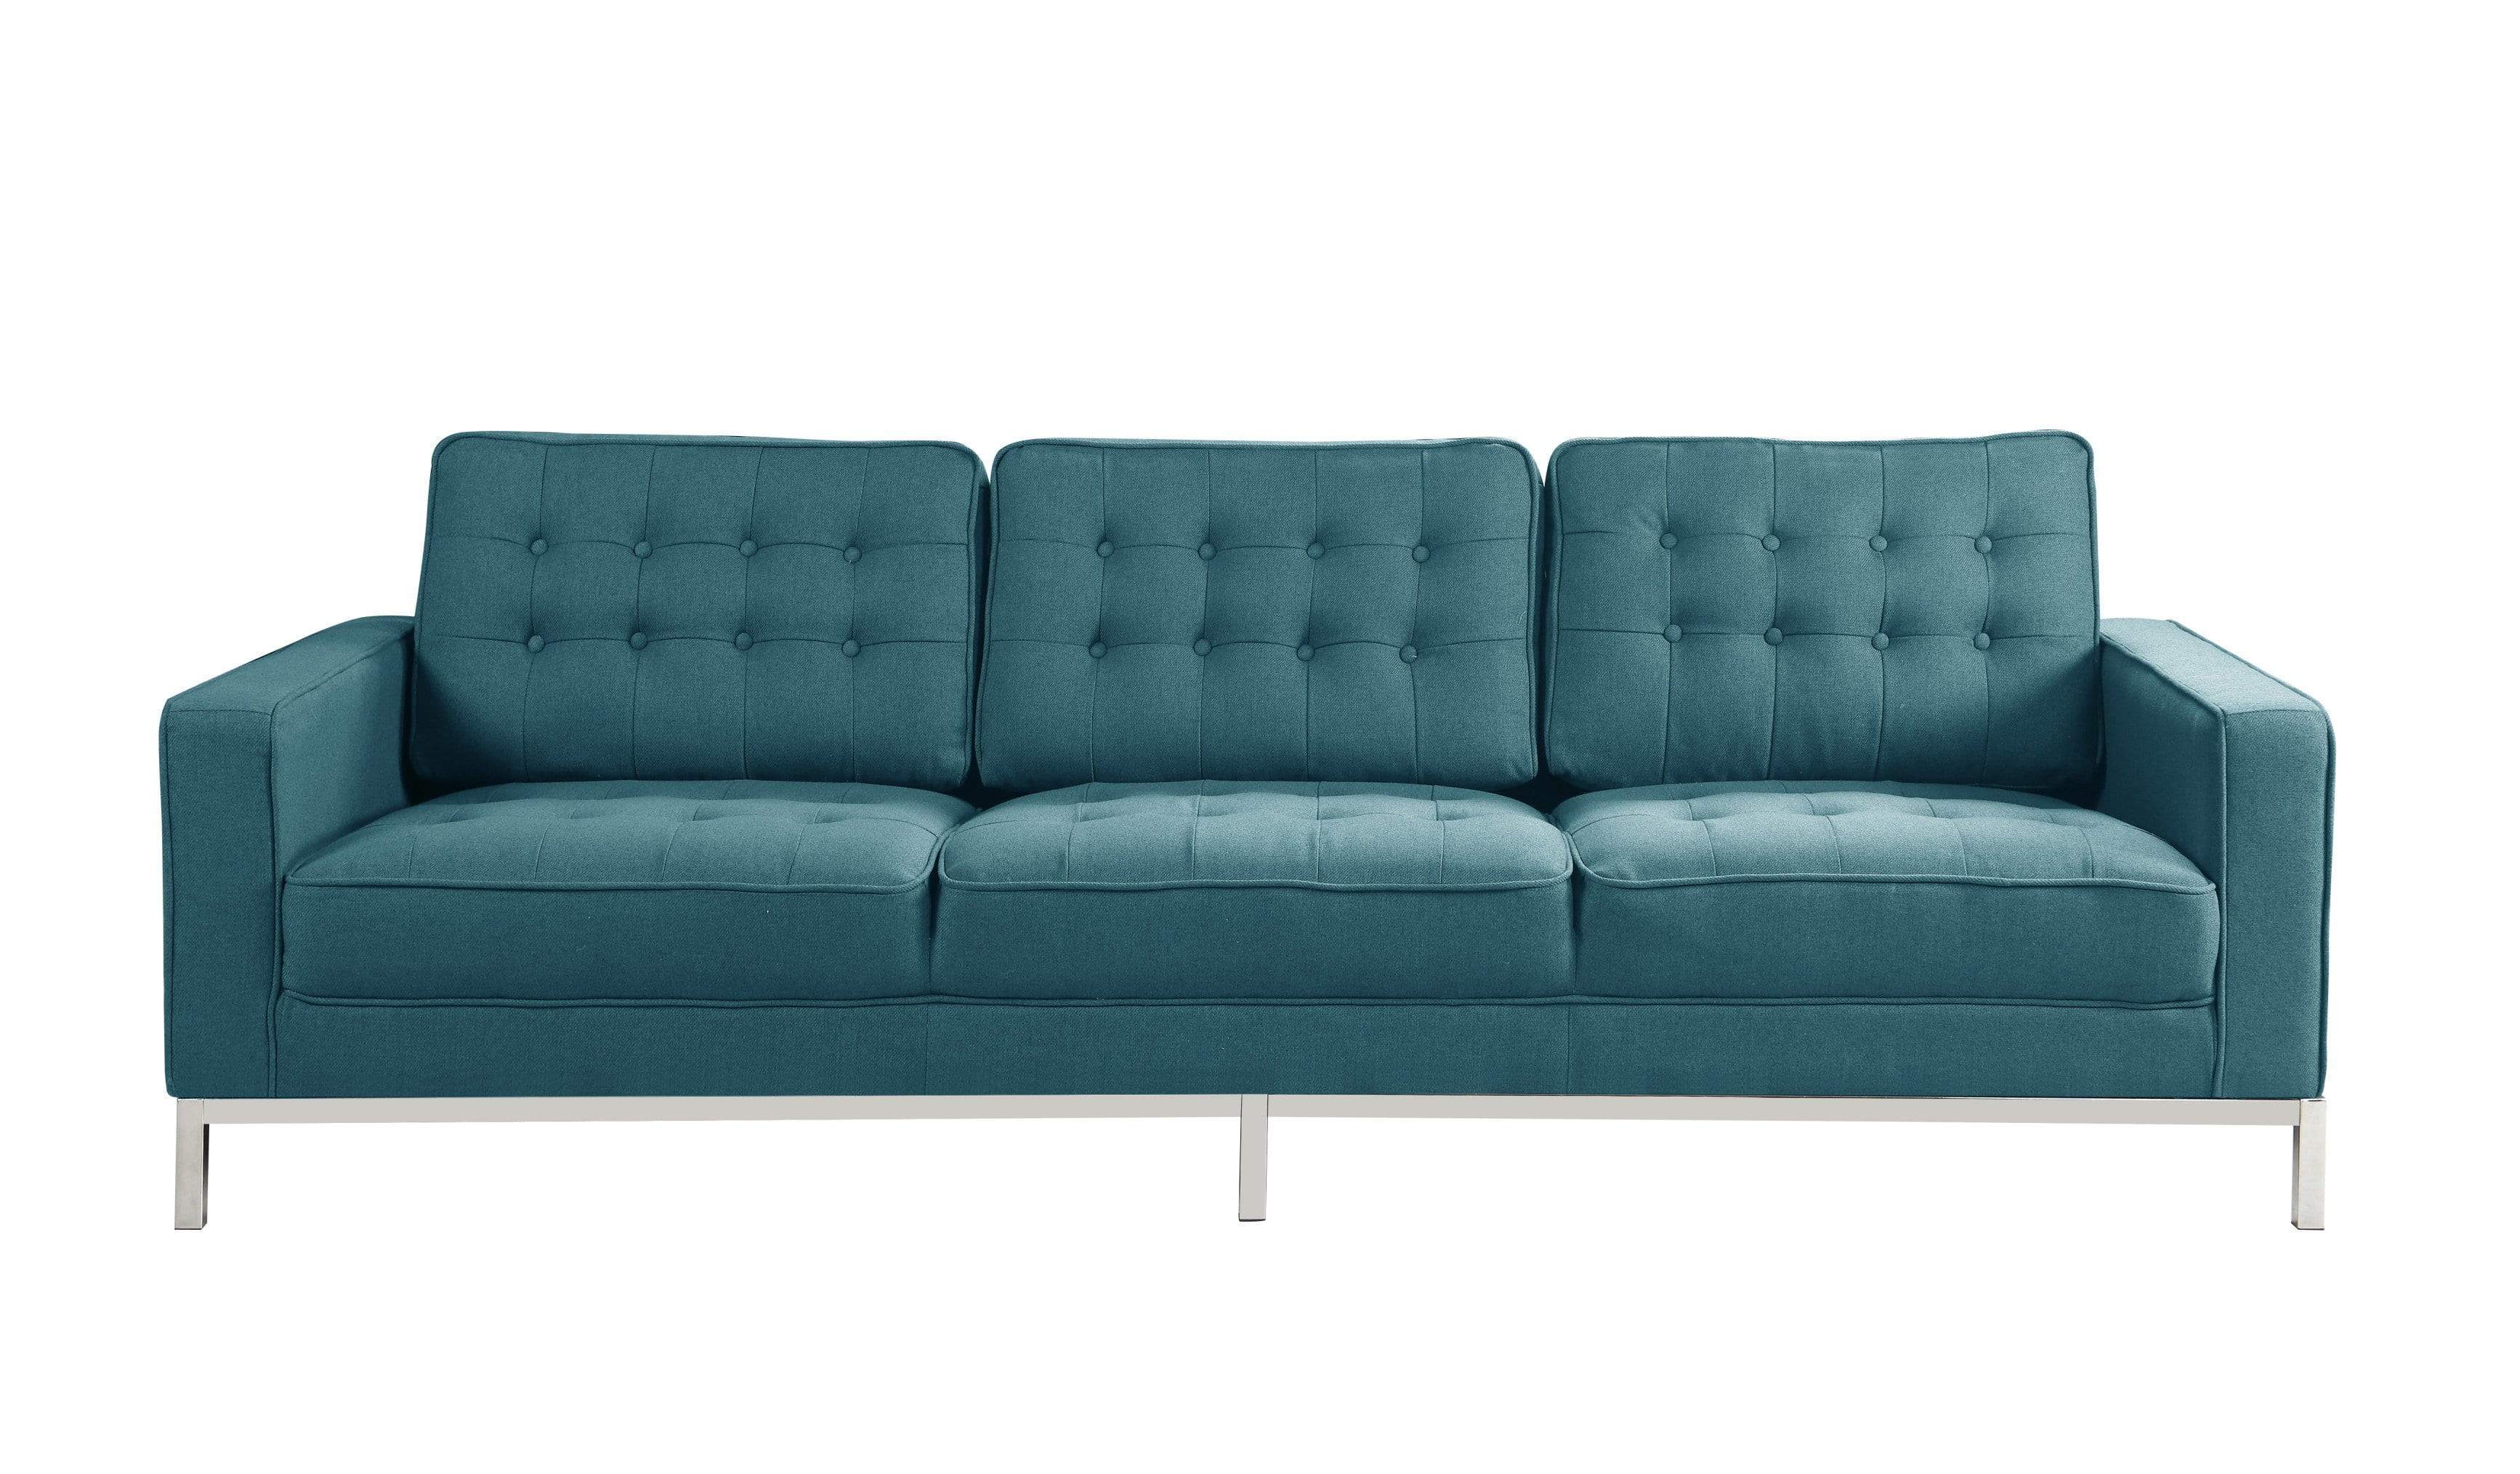 Sterling Three Seat Tufted Linen Sofa